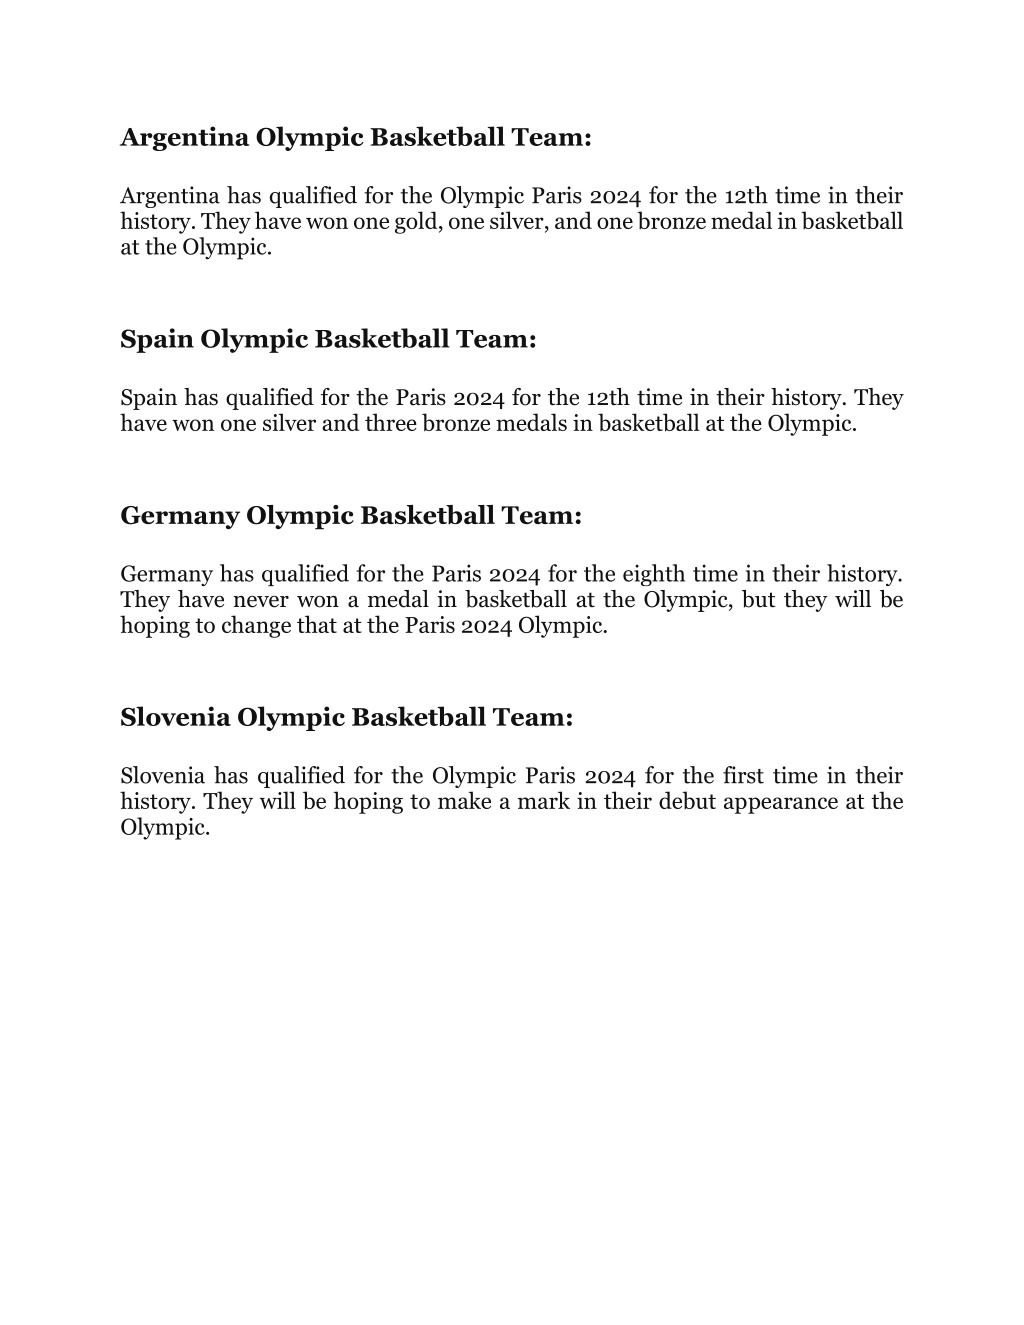 PPT Paris 2024 Olympic Basketball Men’s and Women’s qualified teams